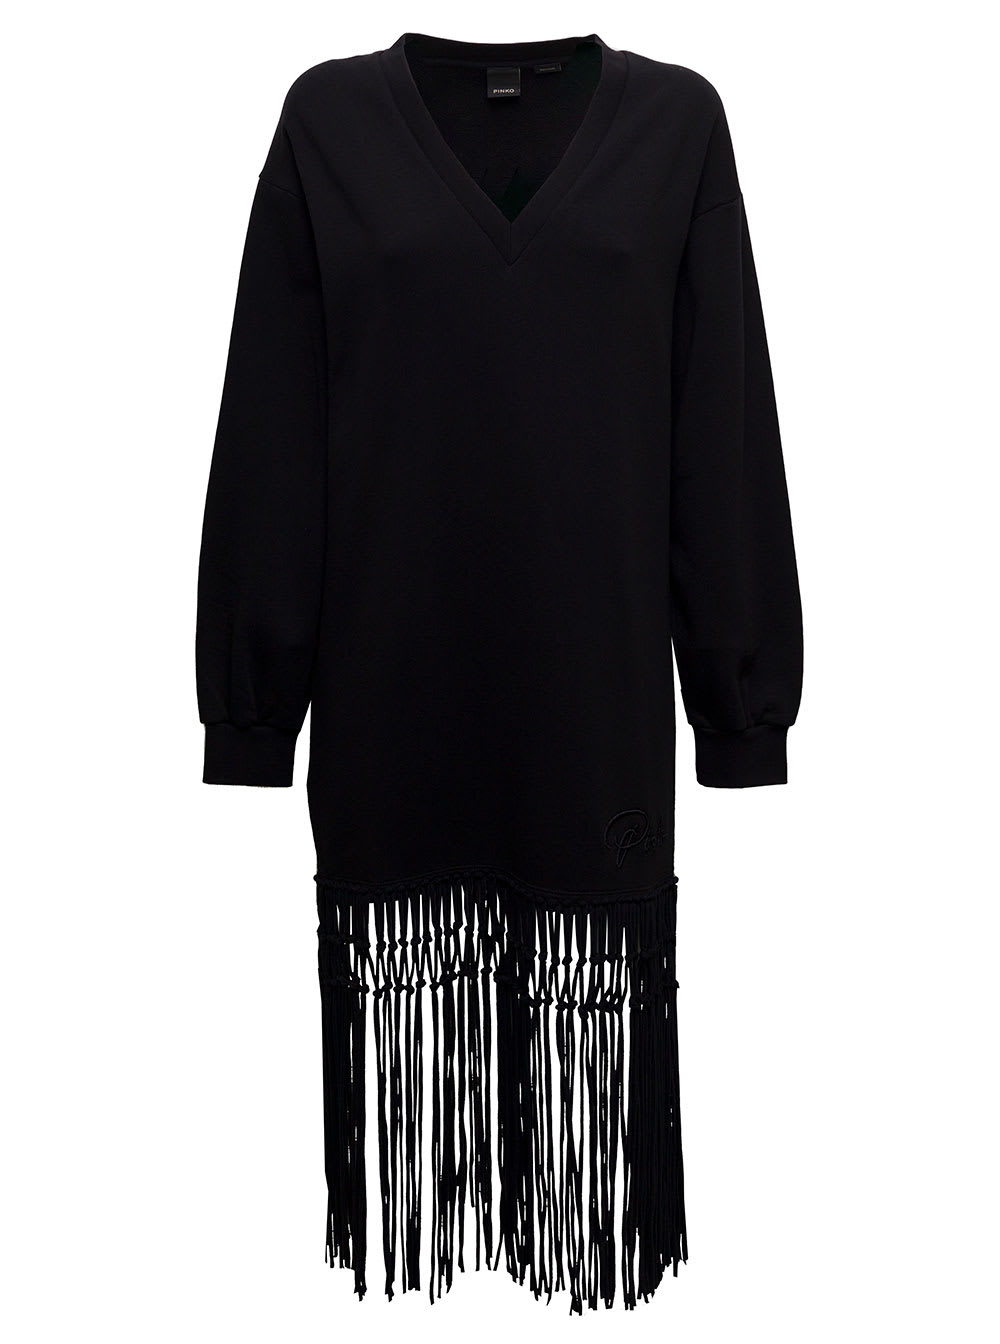 Black Cotton Dress With Fringes Pinko Woman